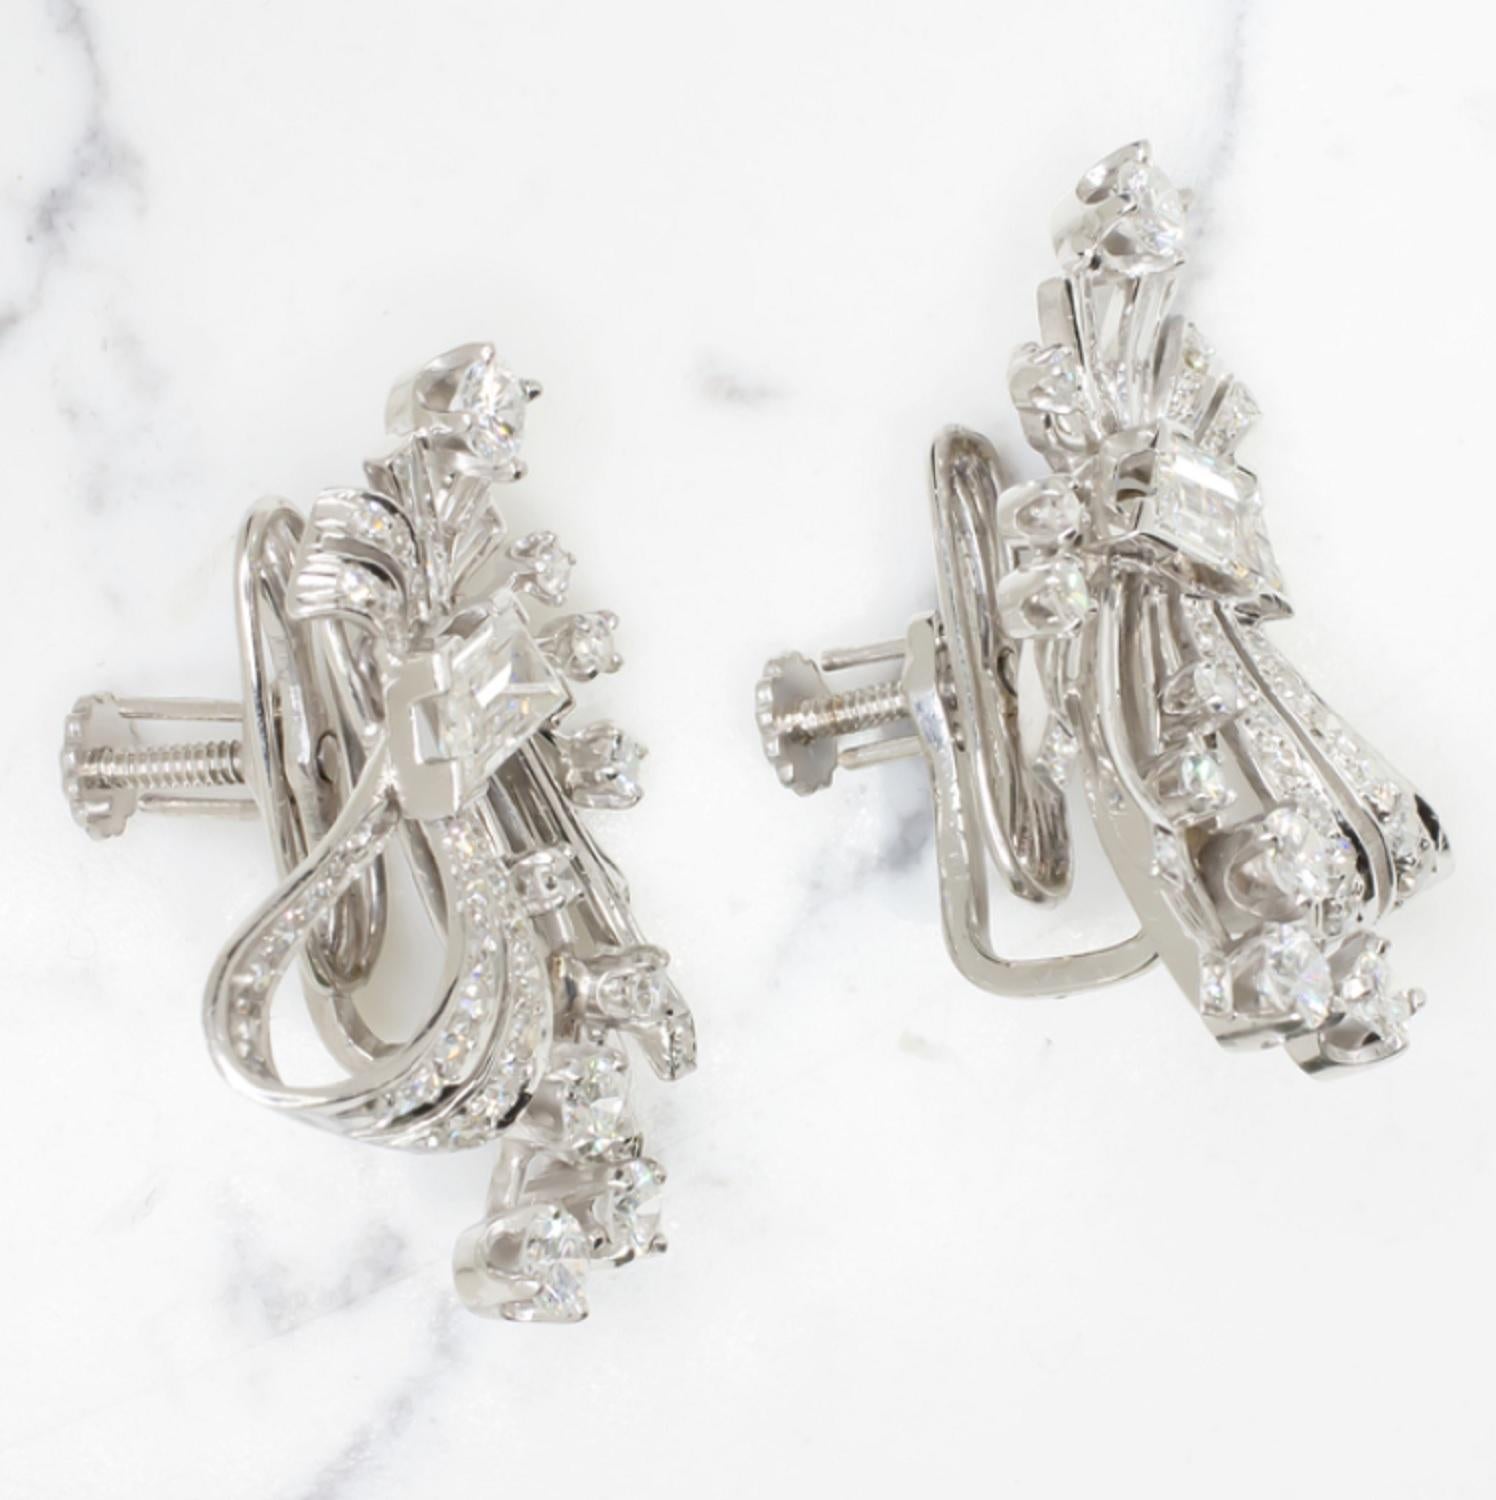 Exquisitely and authentic vintage pair of platinum handmade platinum earrings.
The earrings are composed by extremely high-quality trapezoid and round brilliant cut diamonds
color of the trapezoid diamonds and round diamonds is between F till H